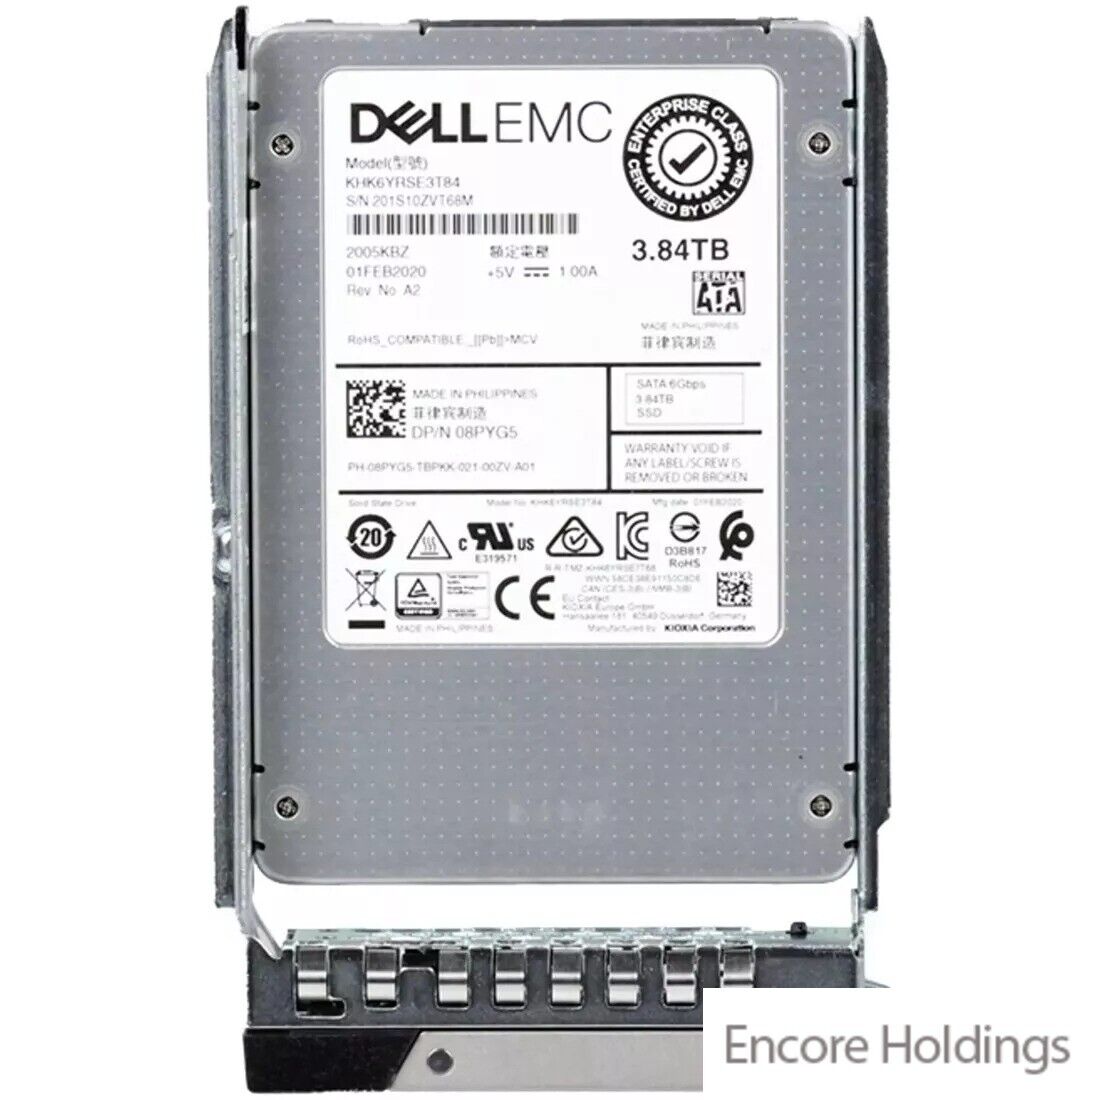 Dell 3.84 TB 2.5 Inches Read Intensive Internal Solid State Drive - 6 8PYG5